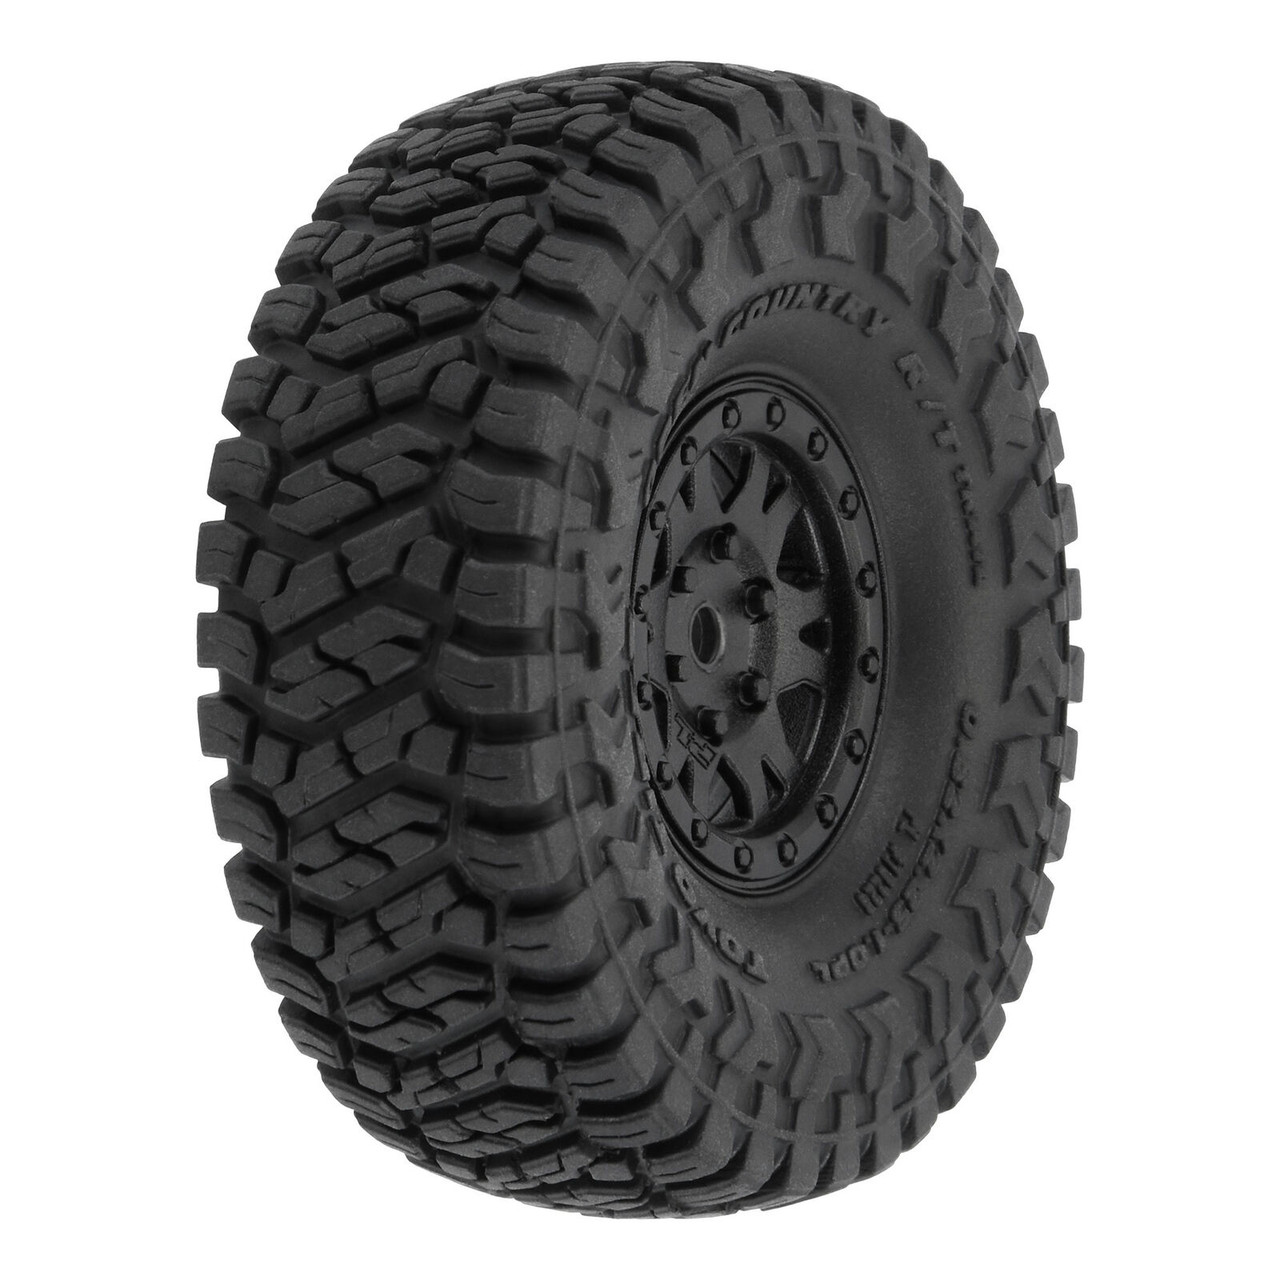 Proline 1022810 Toyo Open Country R/T Trail 1.0" Tires Mounted on Mini Impulse Black Internal BeadLoc 7mm Hex Wheels (4) for SCX24 Front or Rear